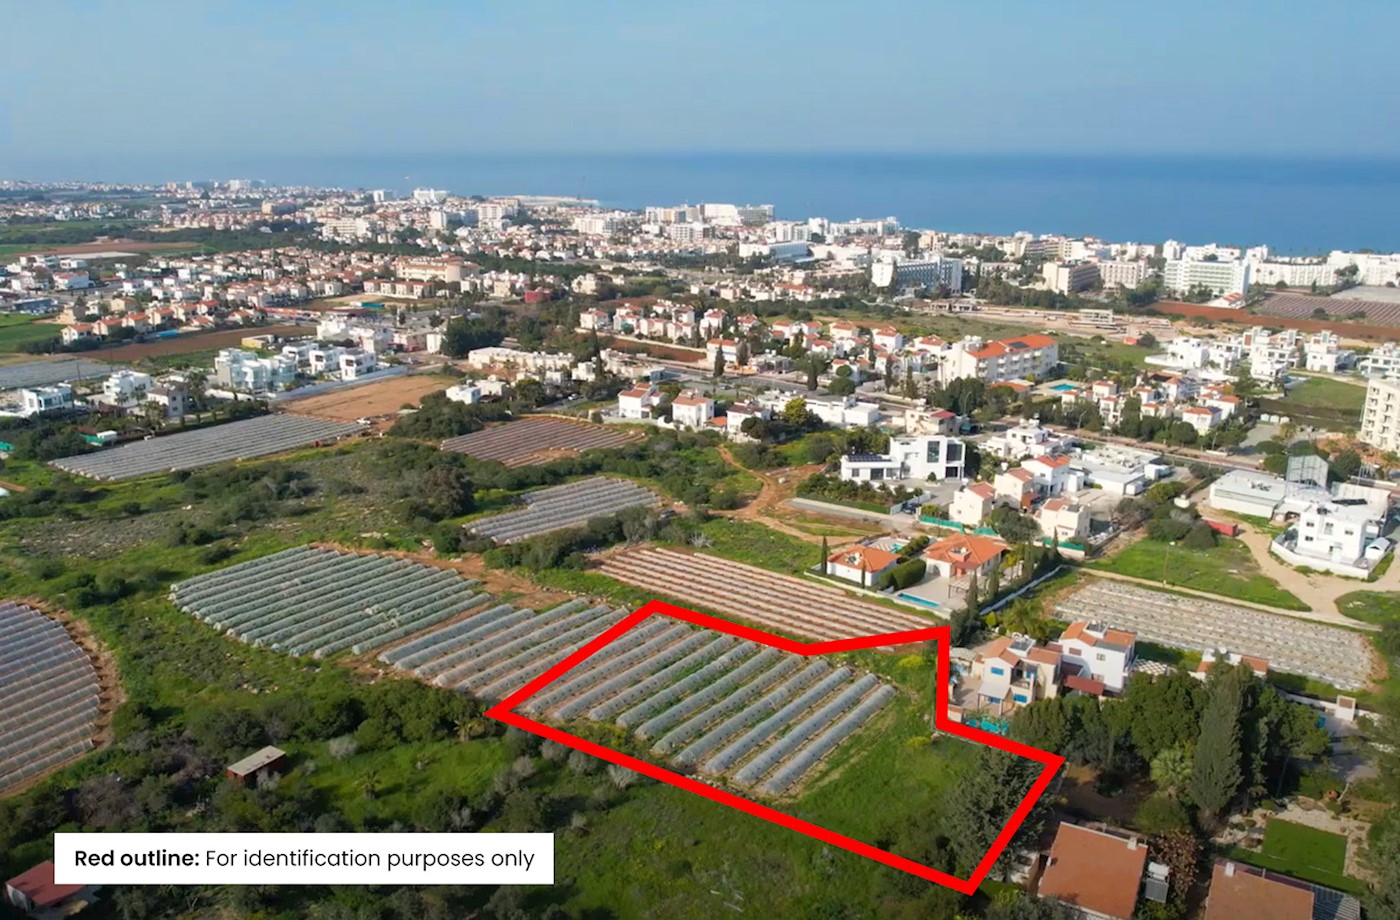 Residential field in Paralimni, Famagusta 1/4